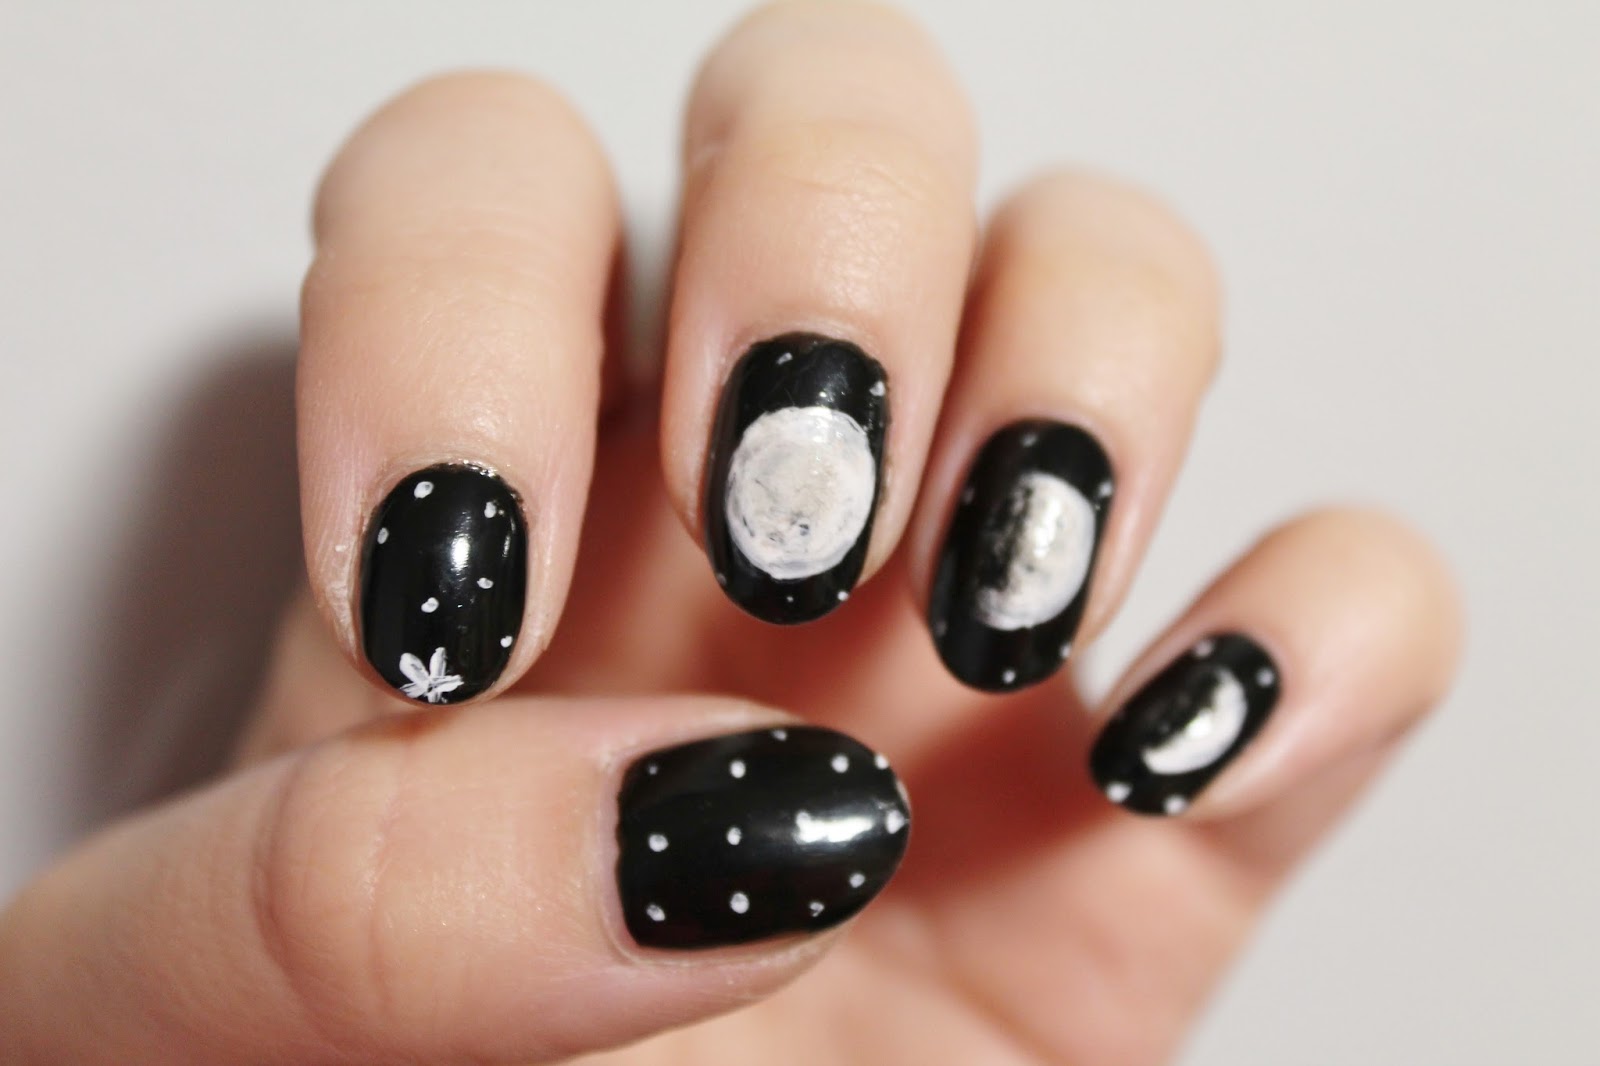 3. Red and Black Marble Nail Art Design - wide 2